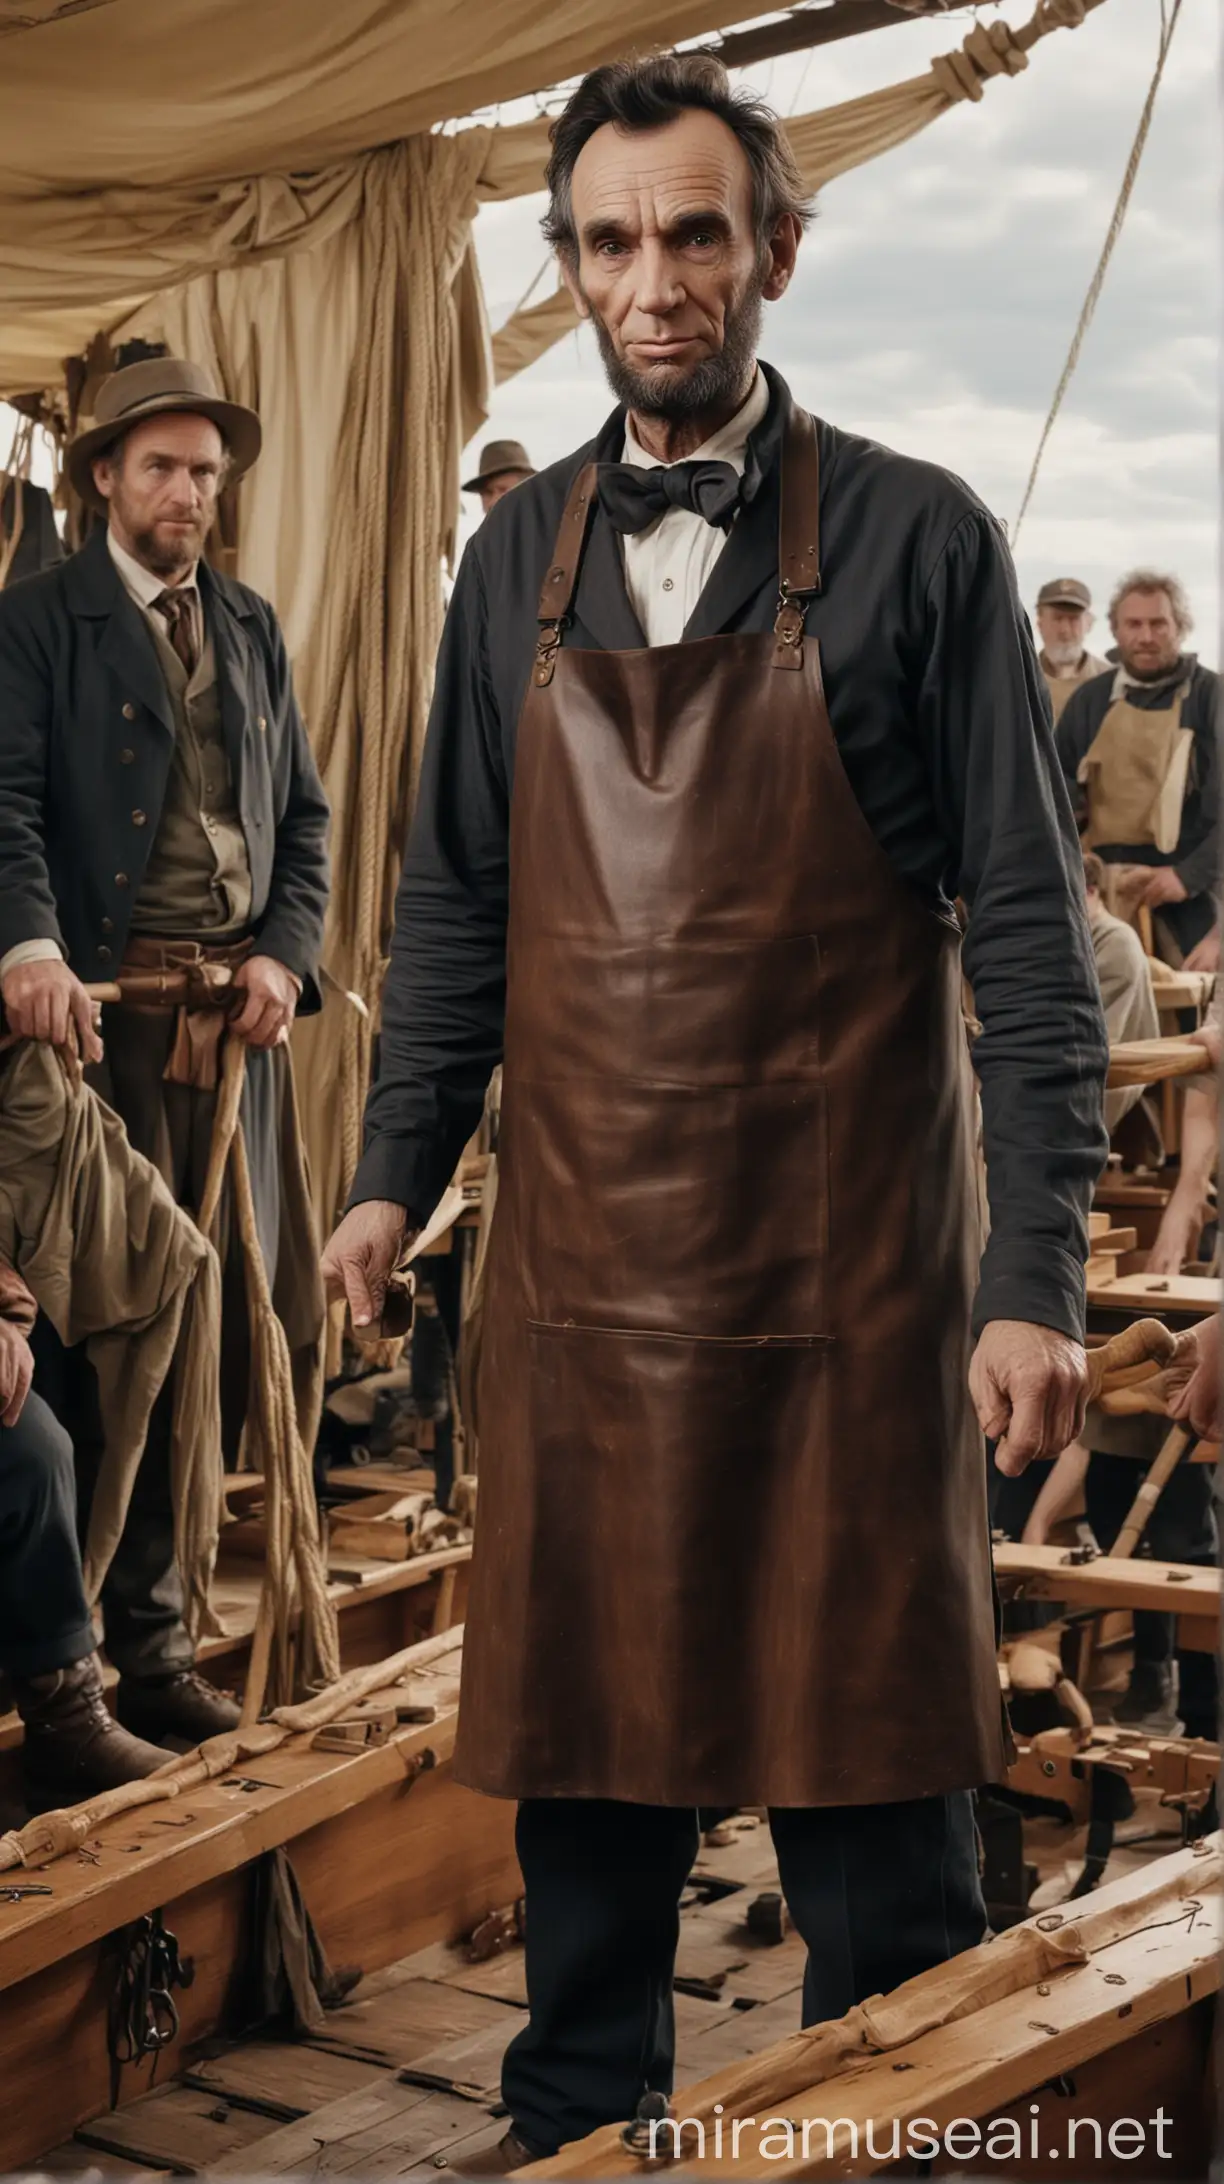 abraham lincoln wearing a leather apron on a boat filled with woodworkers in a scene that looks like washington crossing the delaware